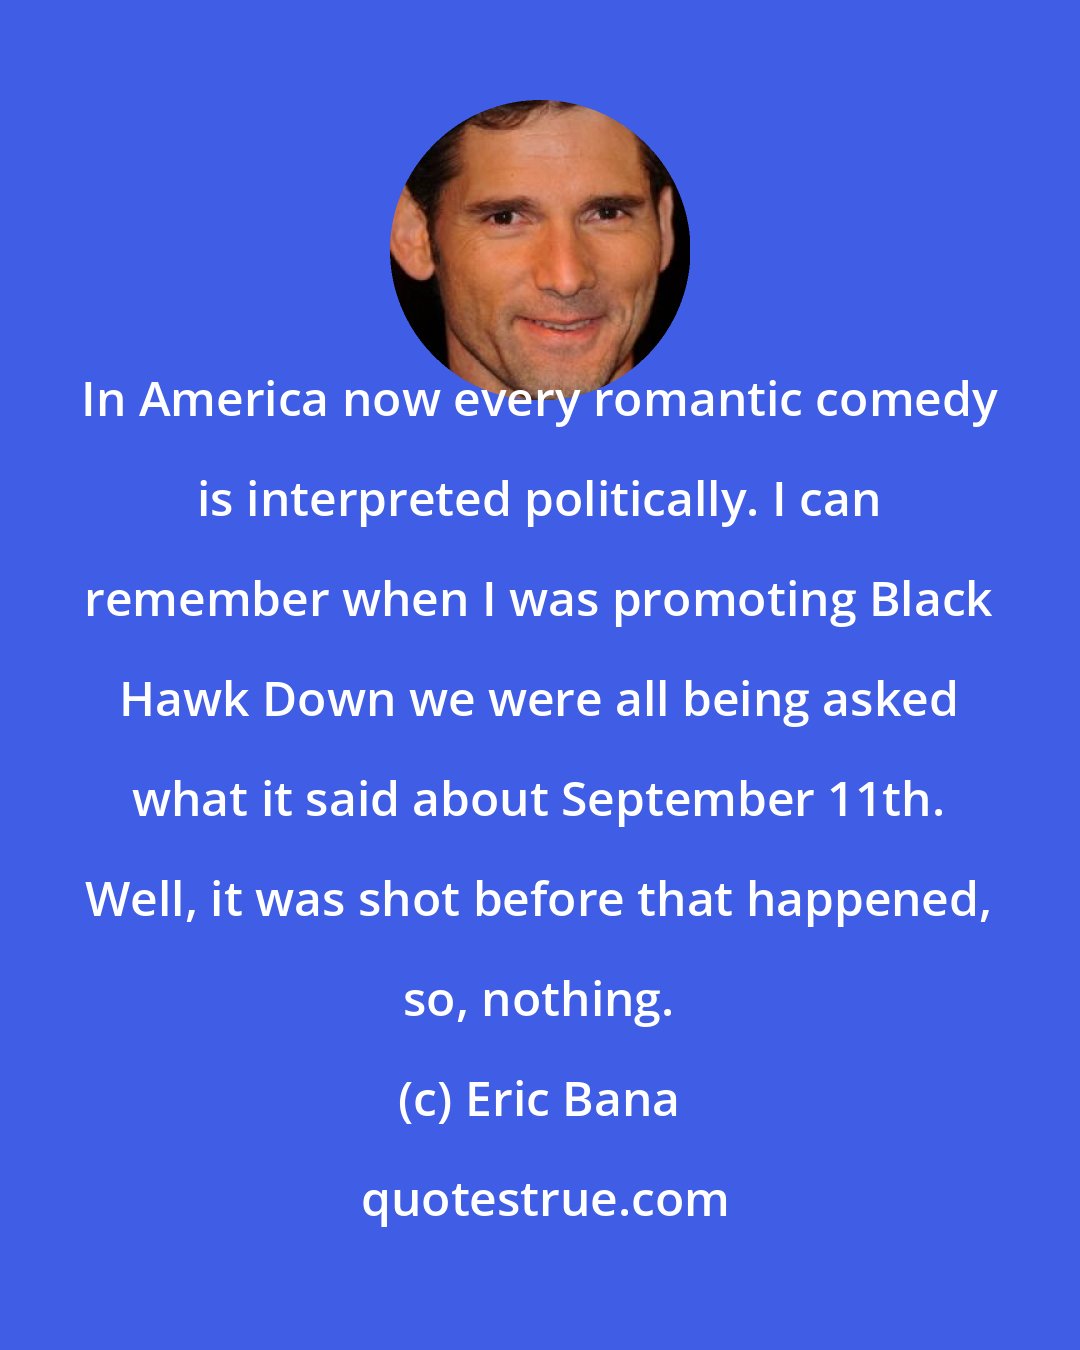 Eric Bana: In America now every romantic comedy is interpreted politically. I can remember when I was promoting Black Hawk Down we were all being asked what it said about September 11th. Well, it was shot before that happened, so, nothing.